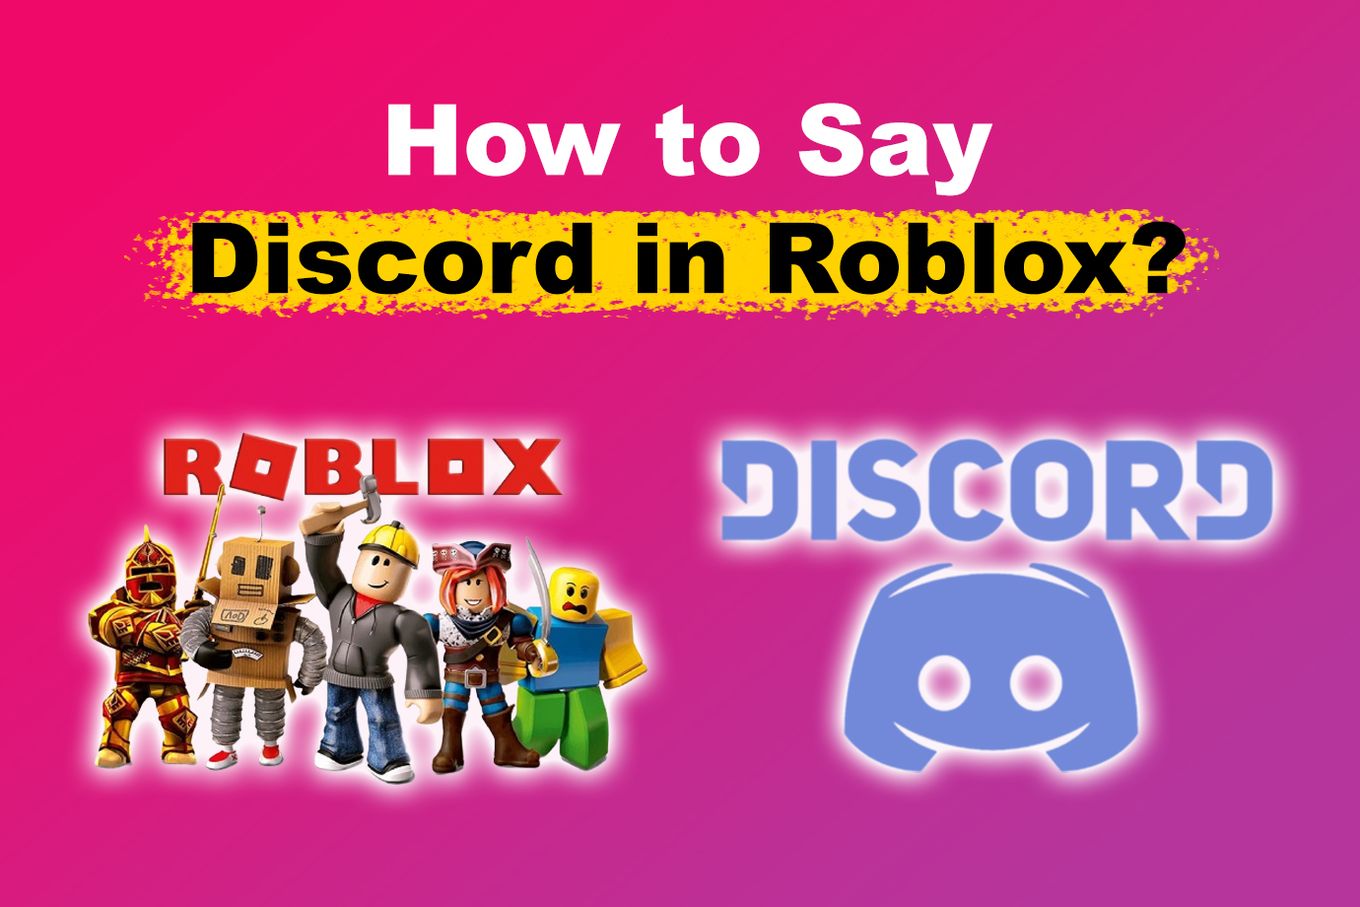 How to say Discord in Roblox